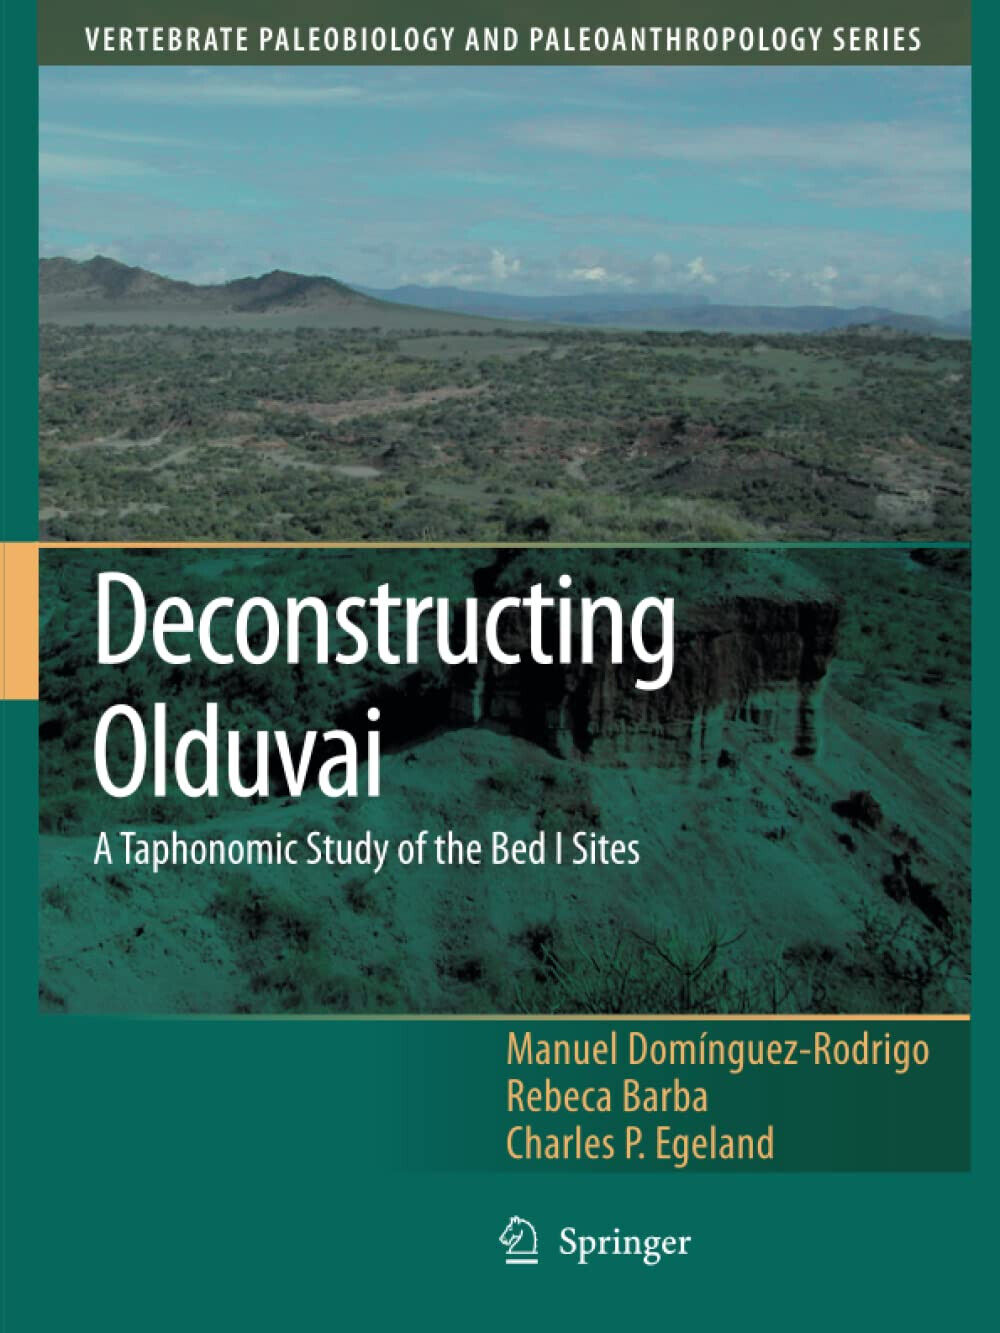 Deconstructing Olduvai: A Taphonomic Study of the Bed I Sites - Spirnger, 2014